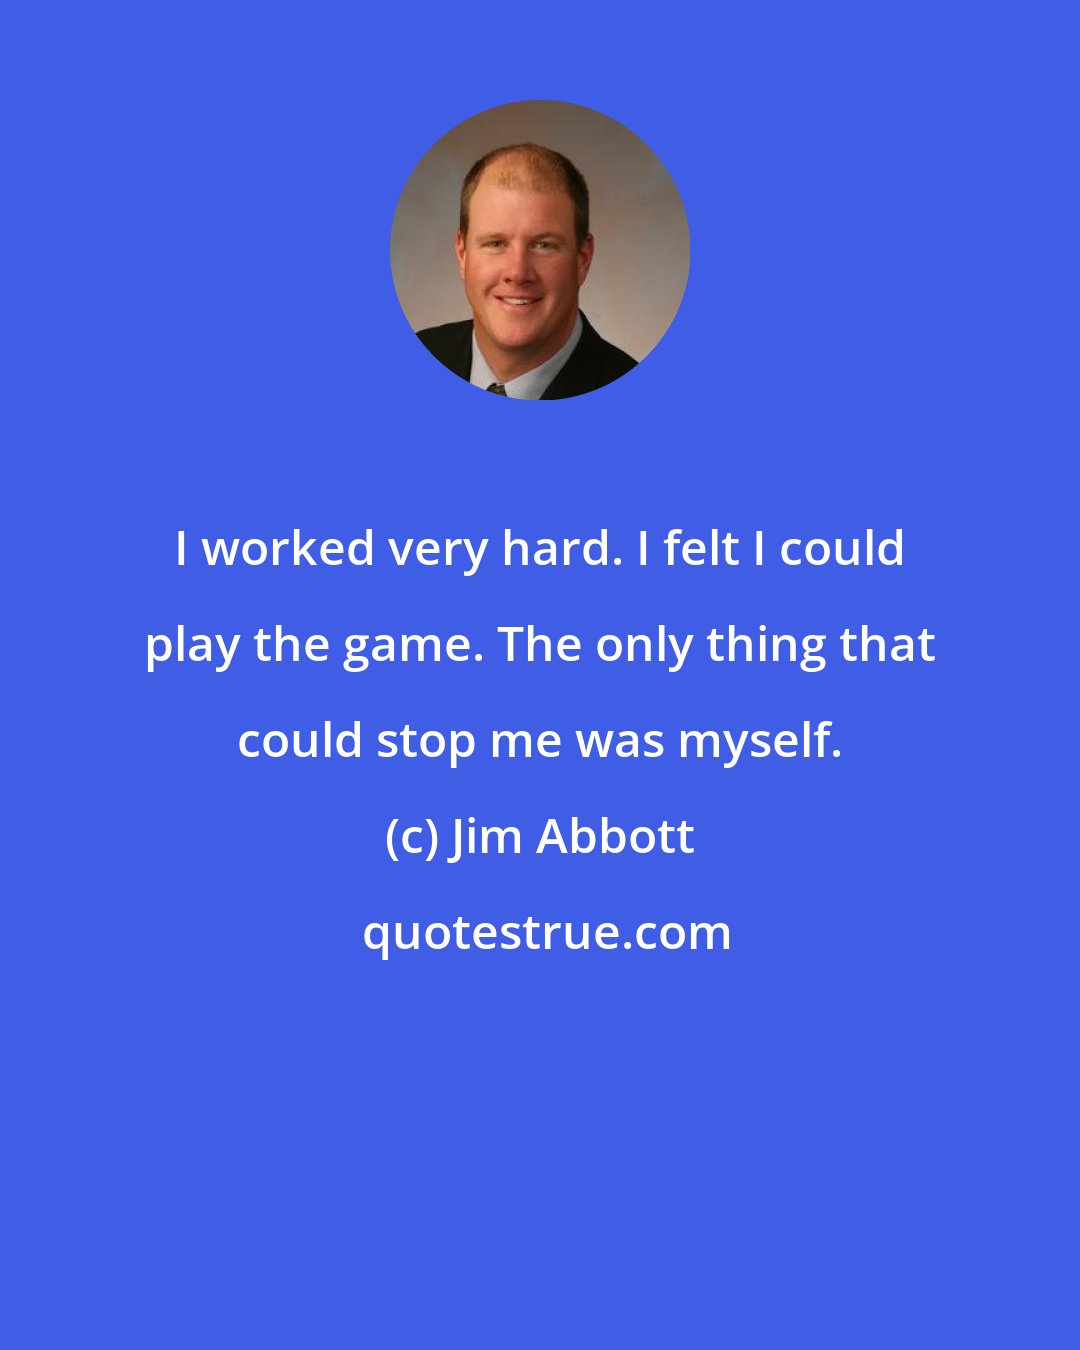 Jim Abbott: I worked very hard. I felt I could play the game. The only thing that could stop me was myself.